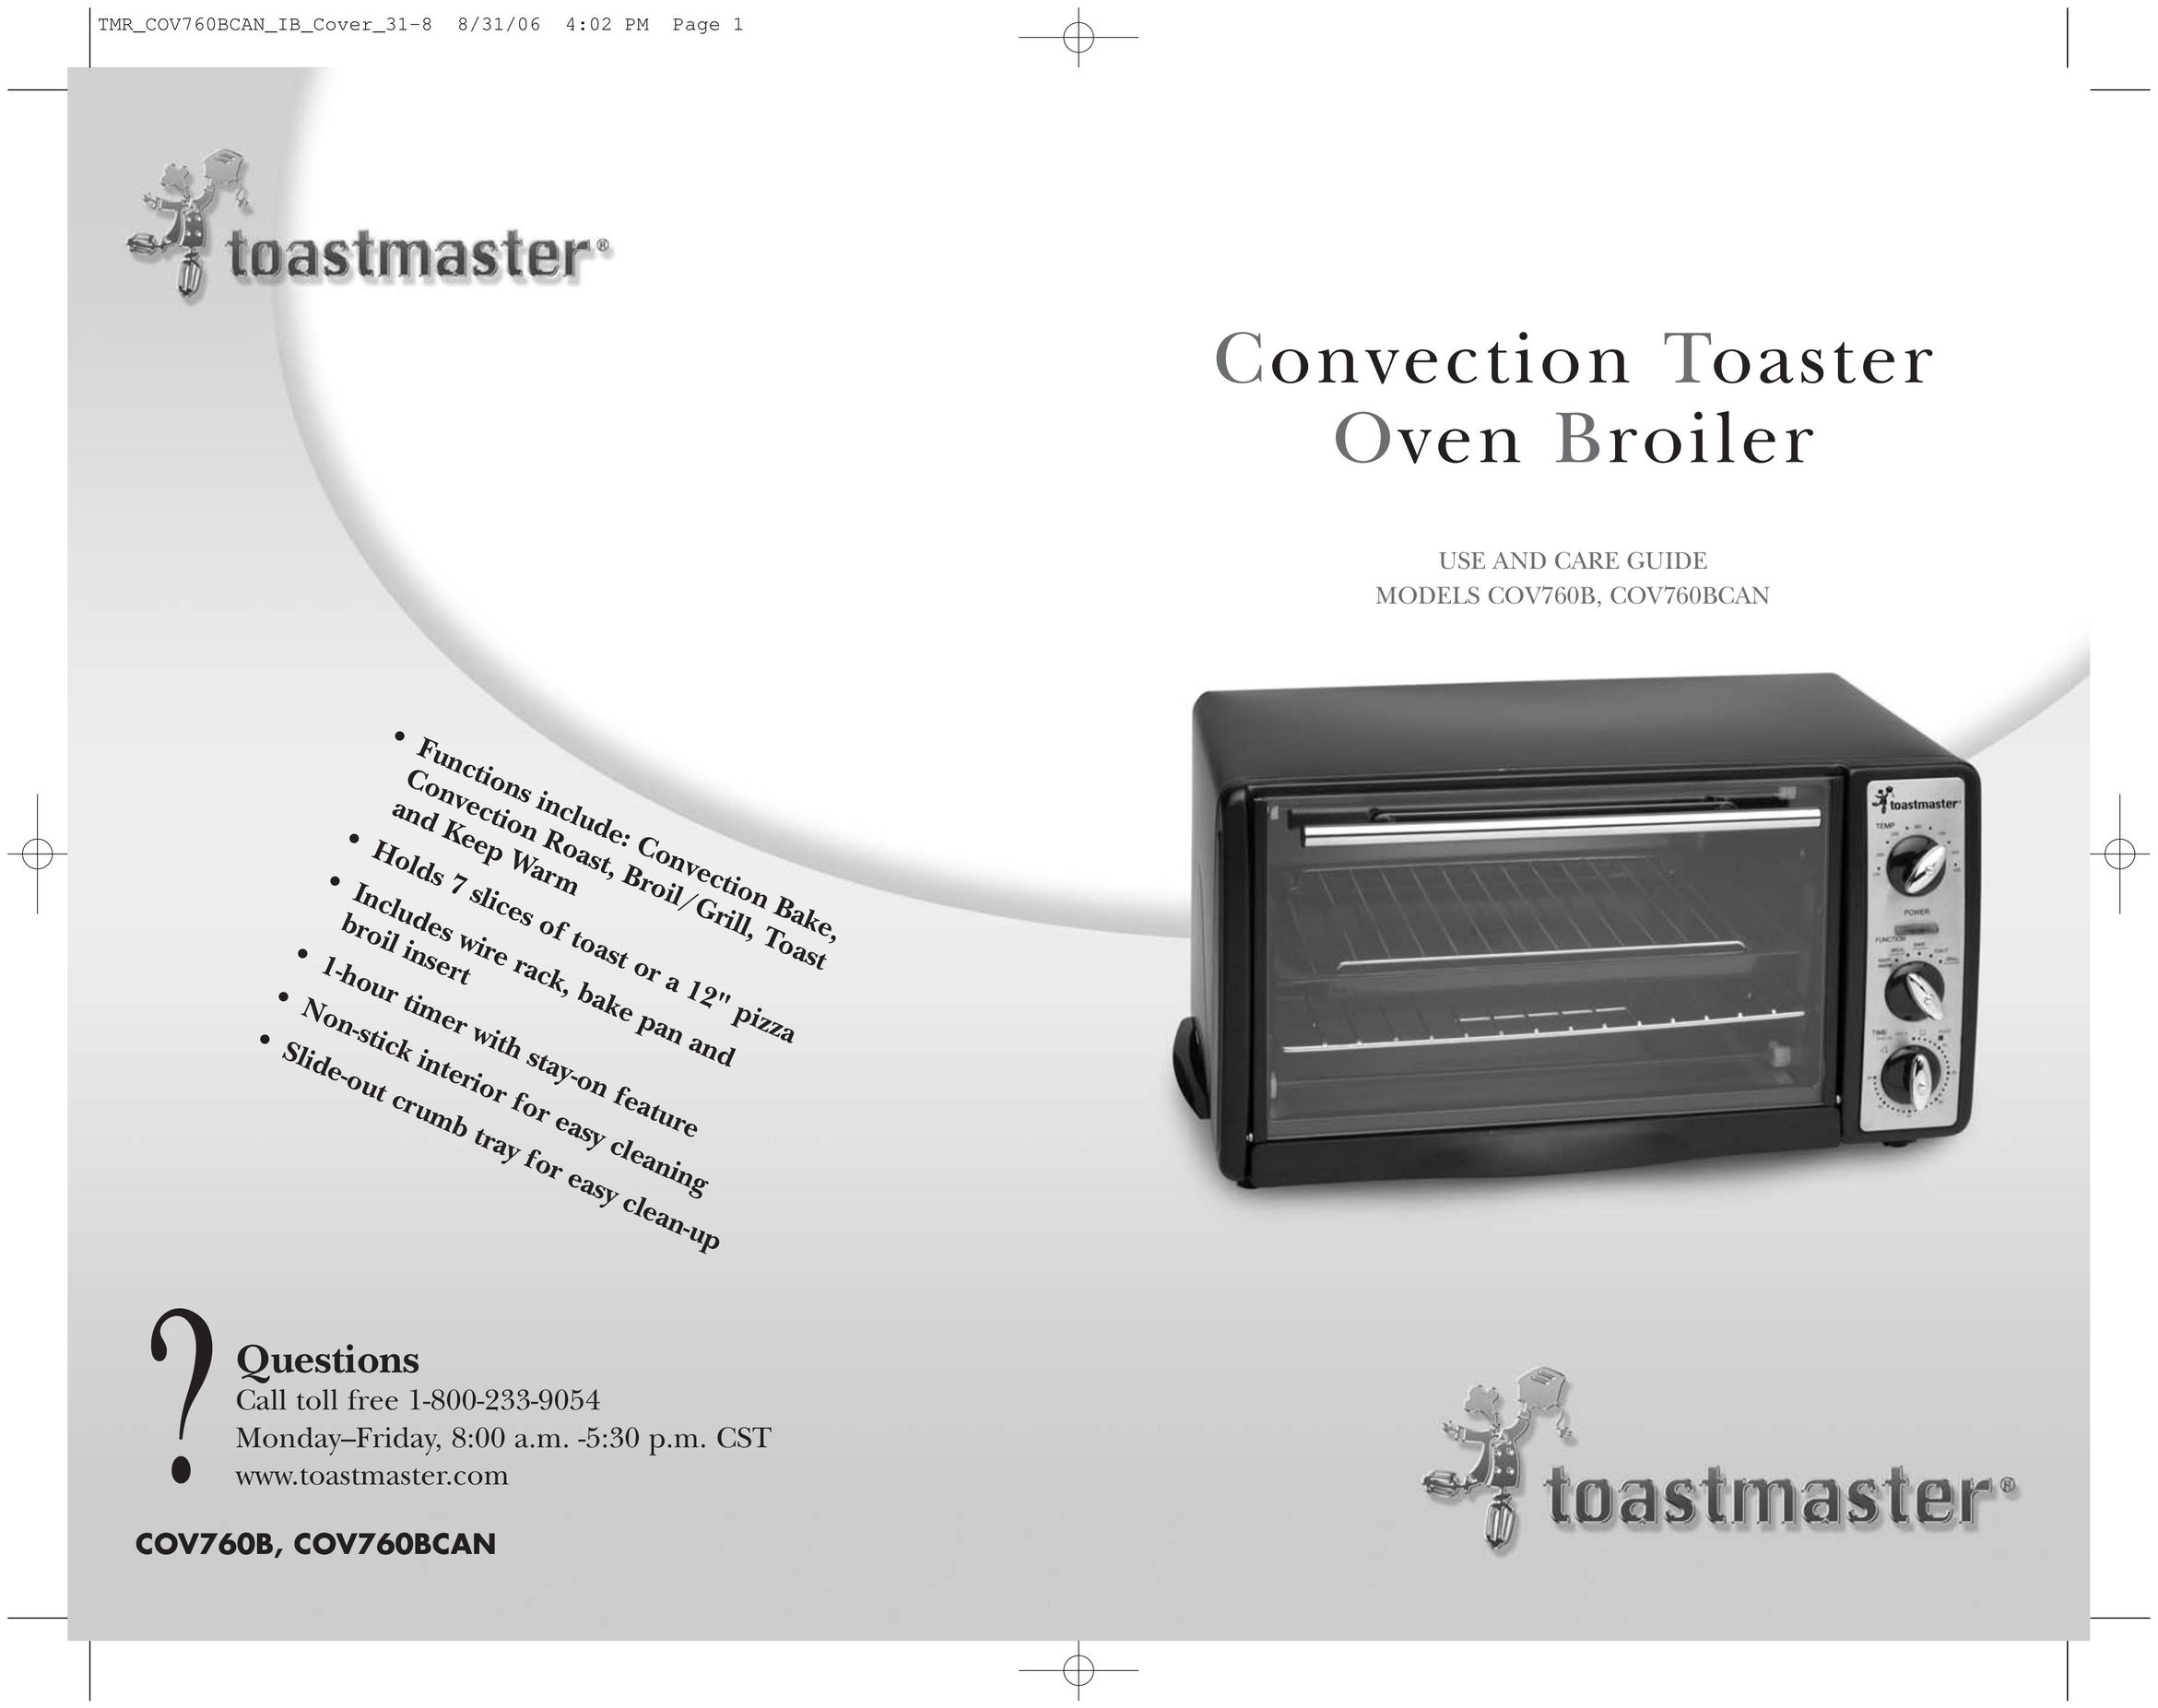 Toastmaster COV760B Convection Oven User Manual